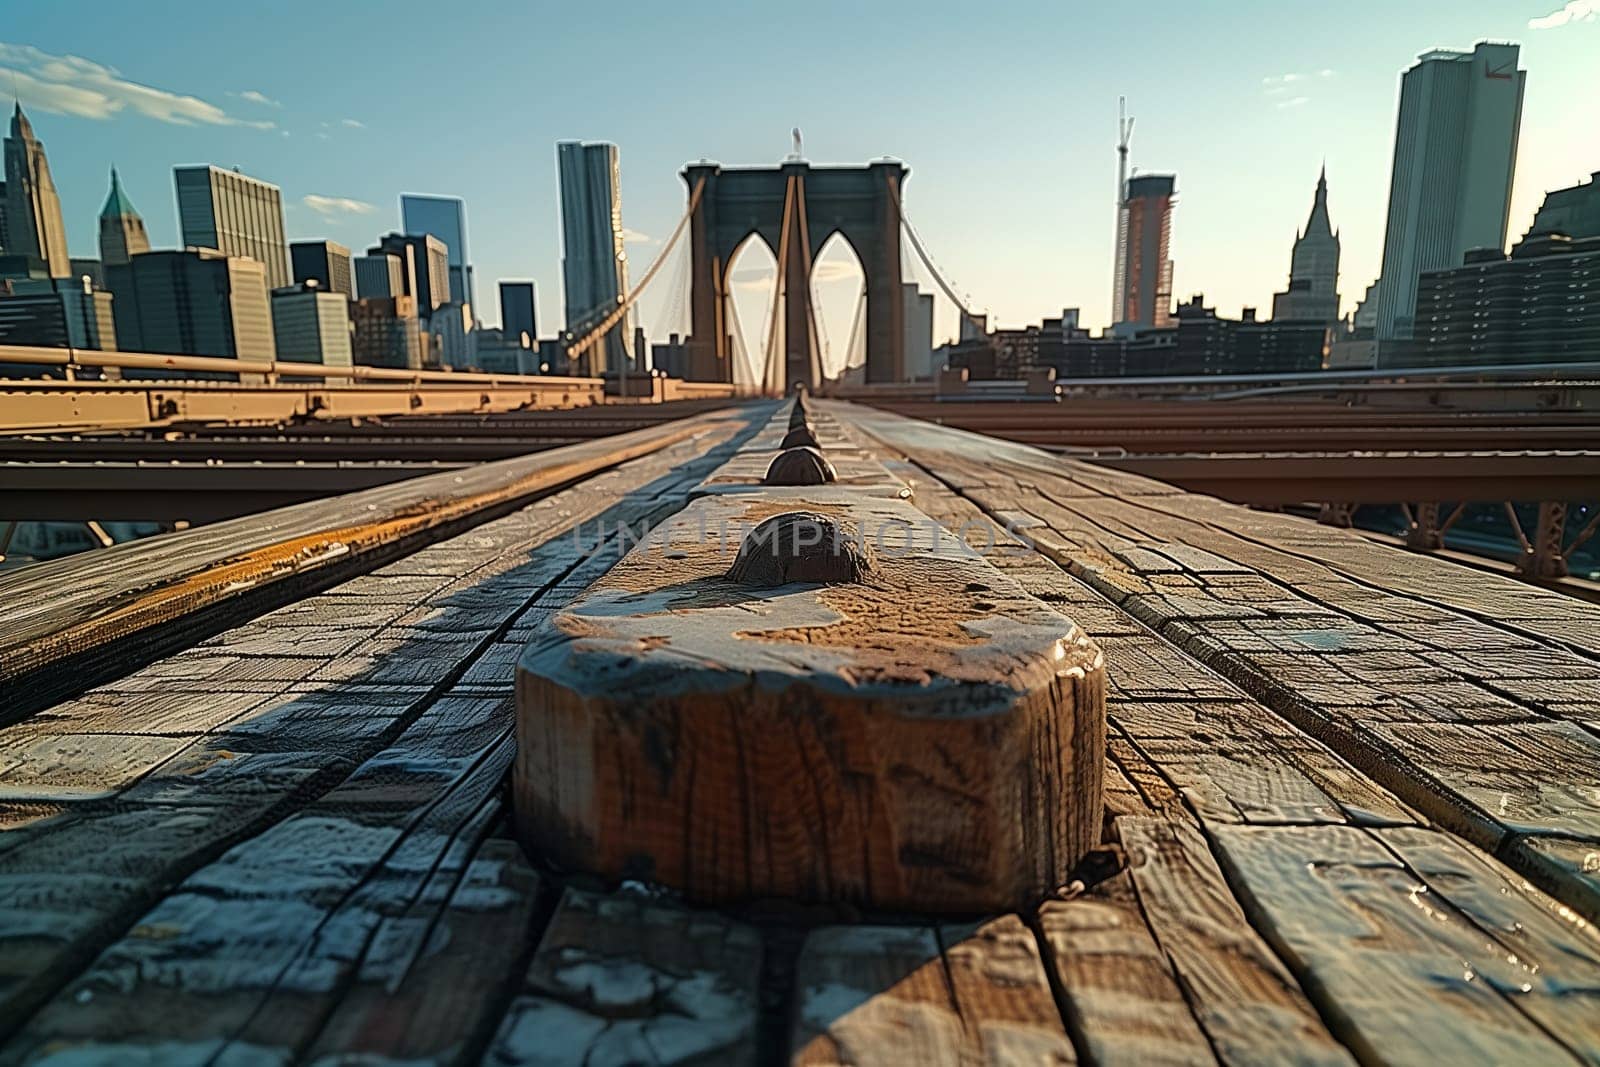 Wooden bridge over railway track with city skyline in the background by richwolf